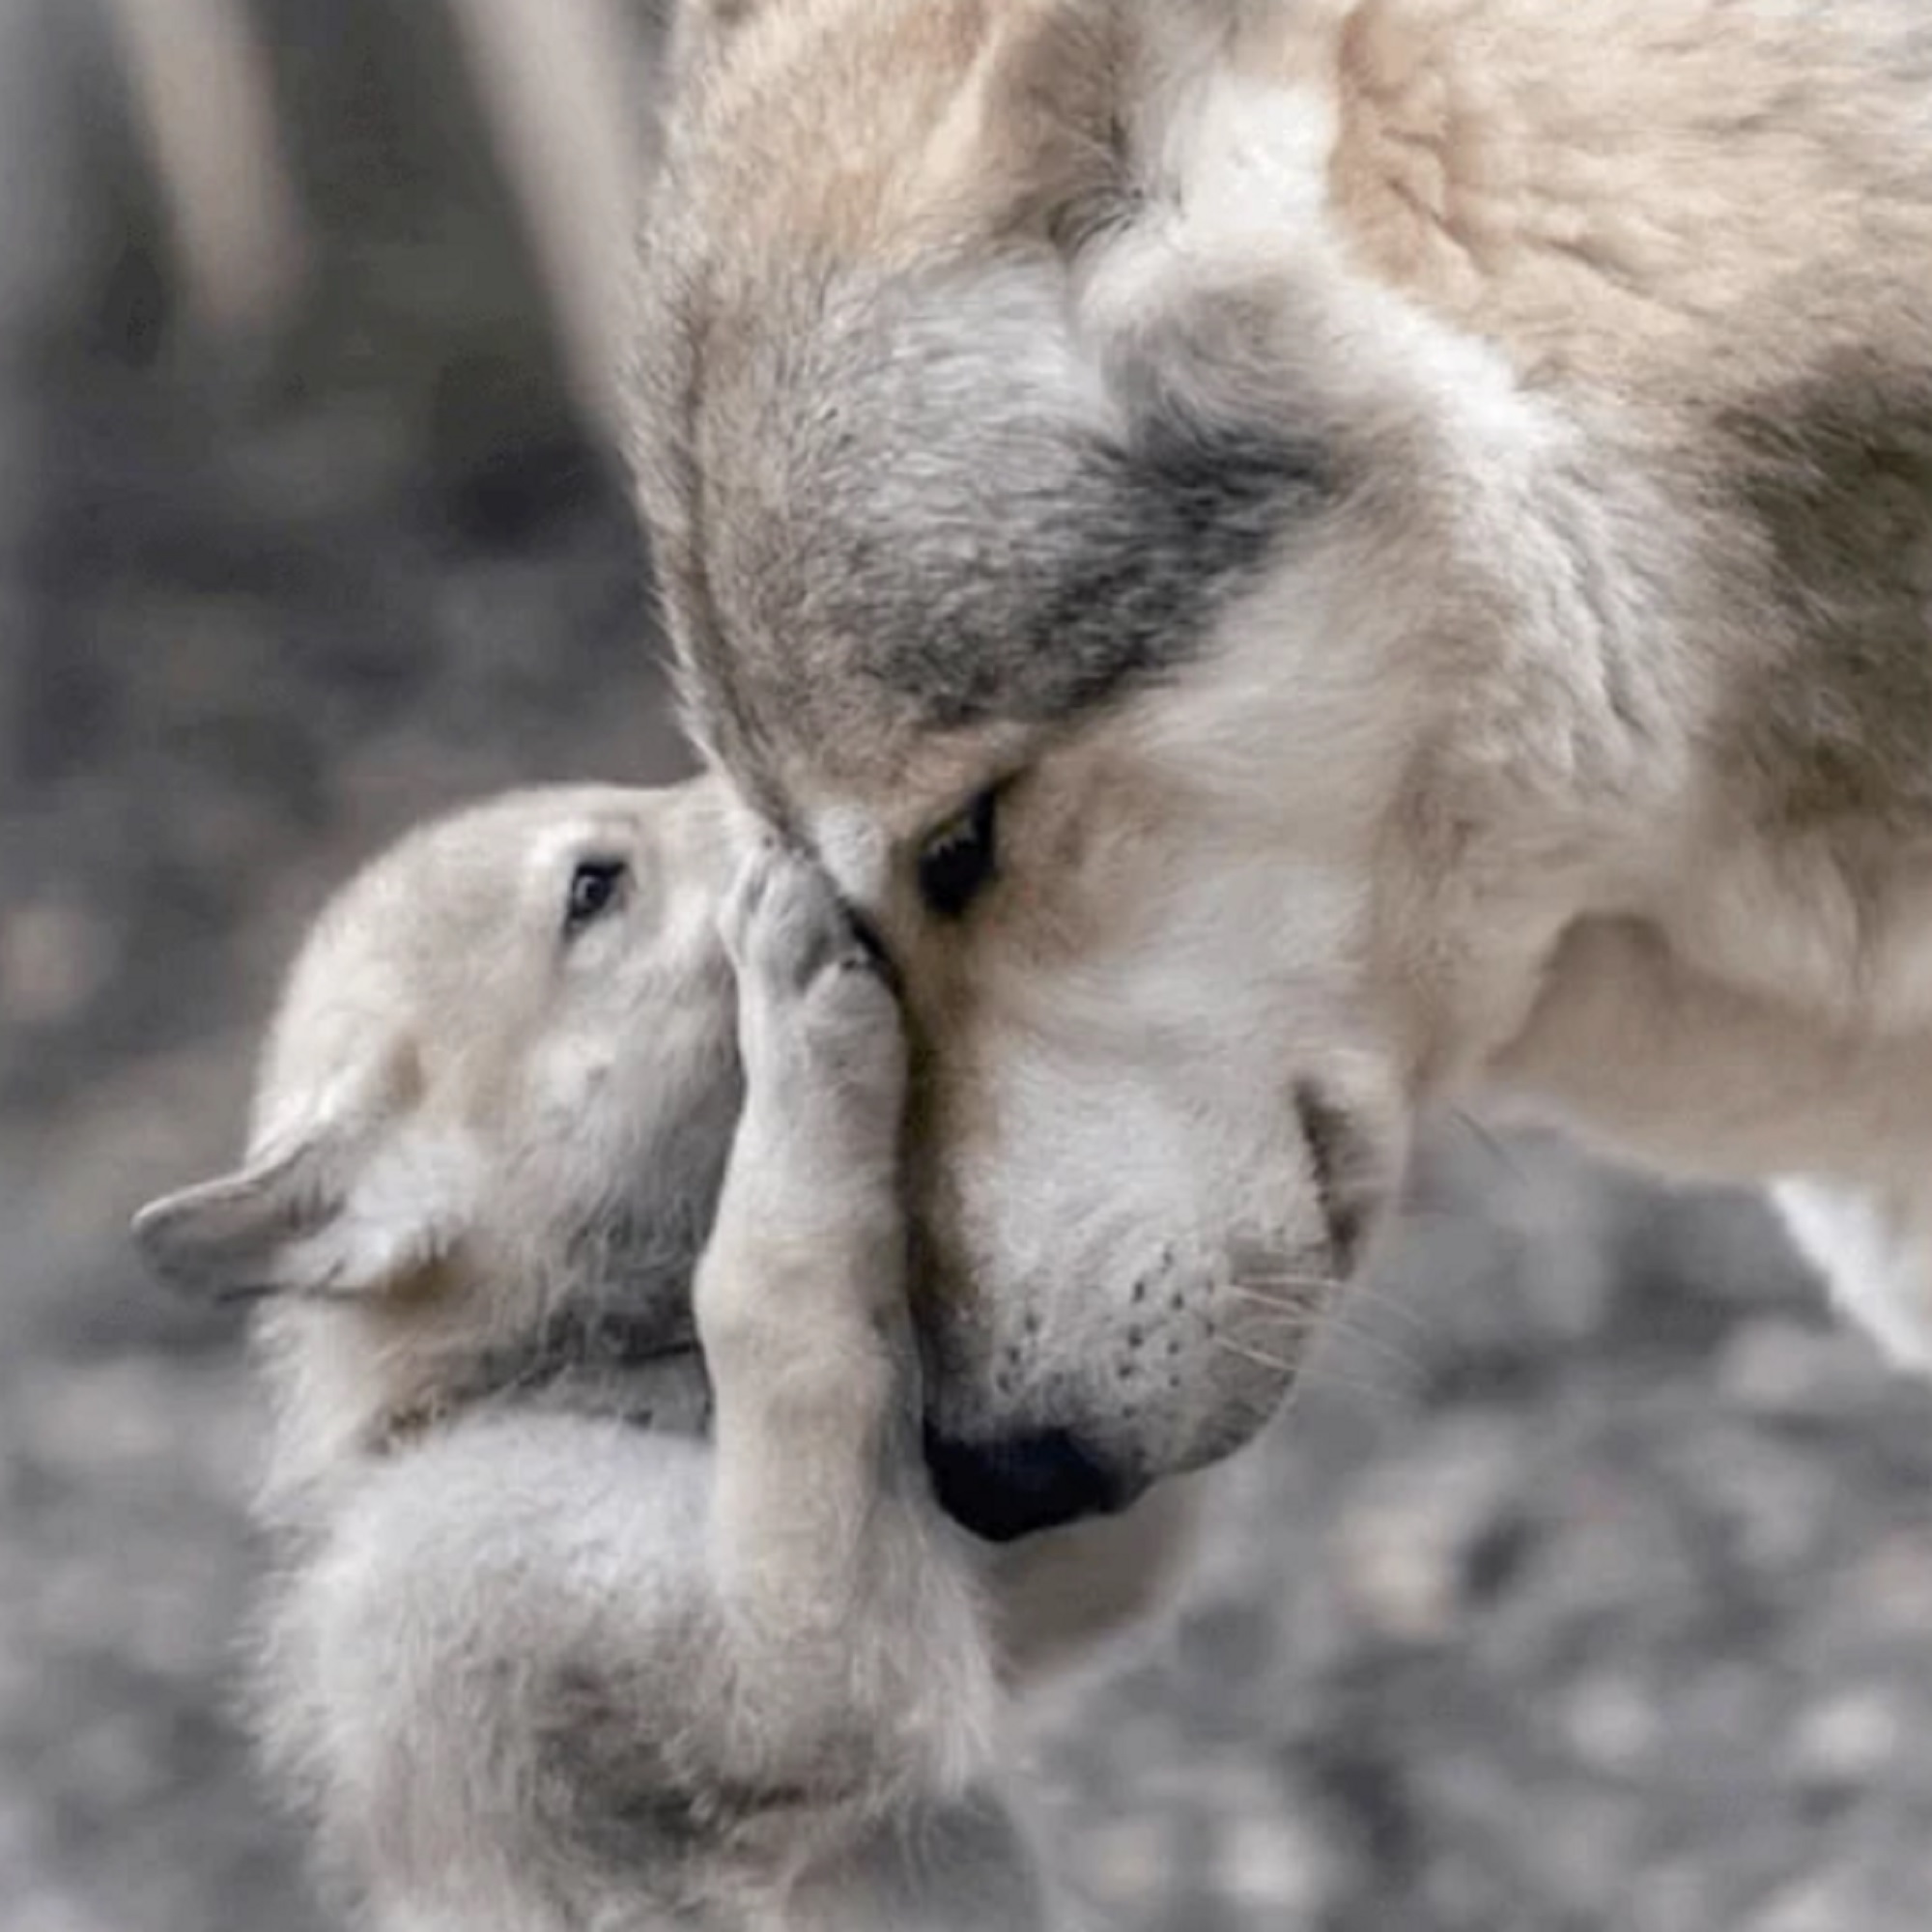 screen shot of a shewolf with her baby